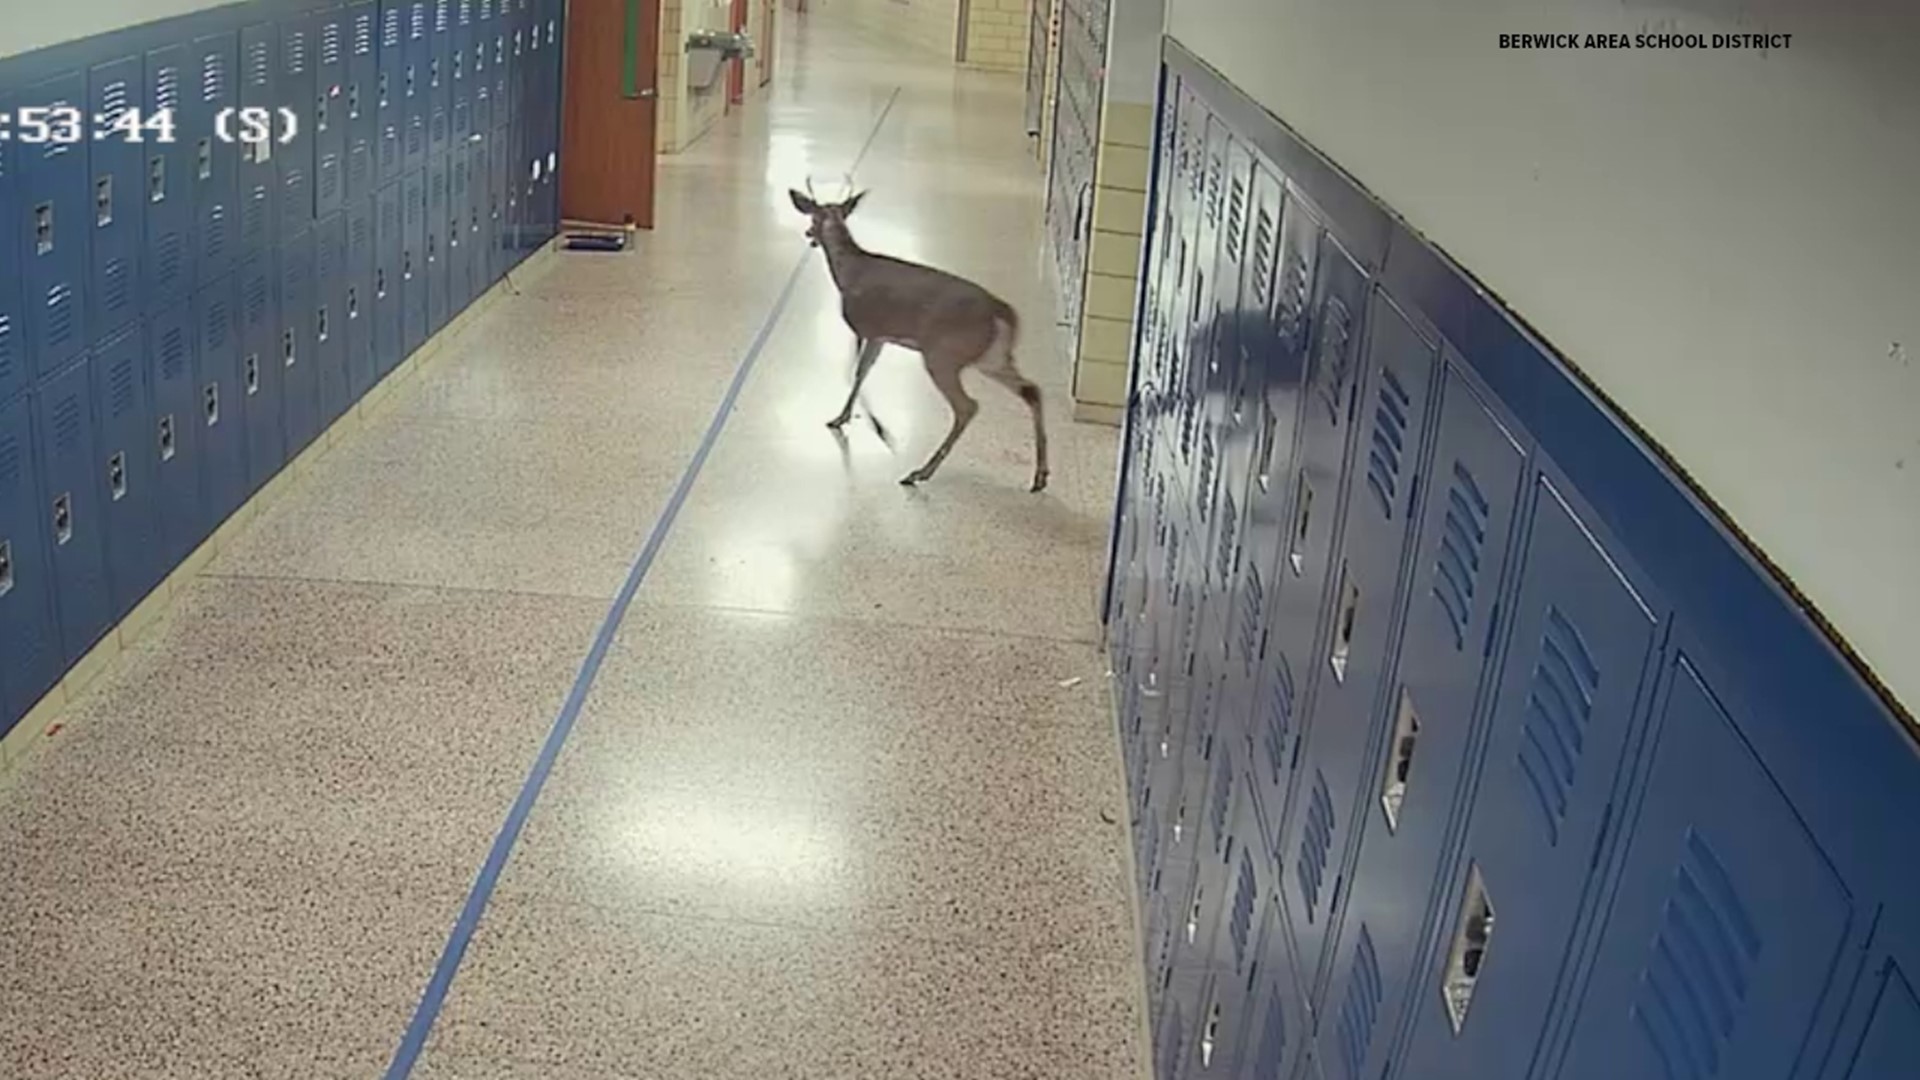 Students and staff at the Berwick Area Middle School got a big surprise Wednesday morning when the animal crashed through a window into a classroom.